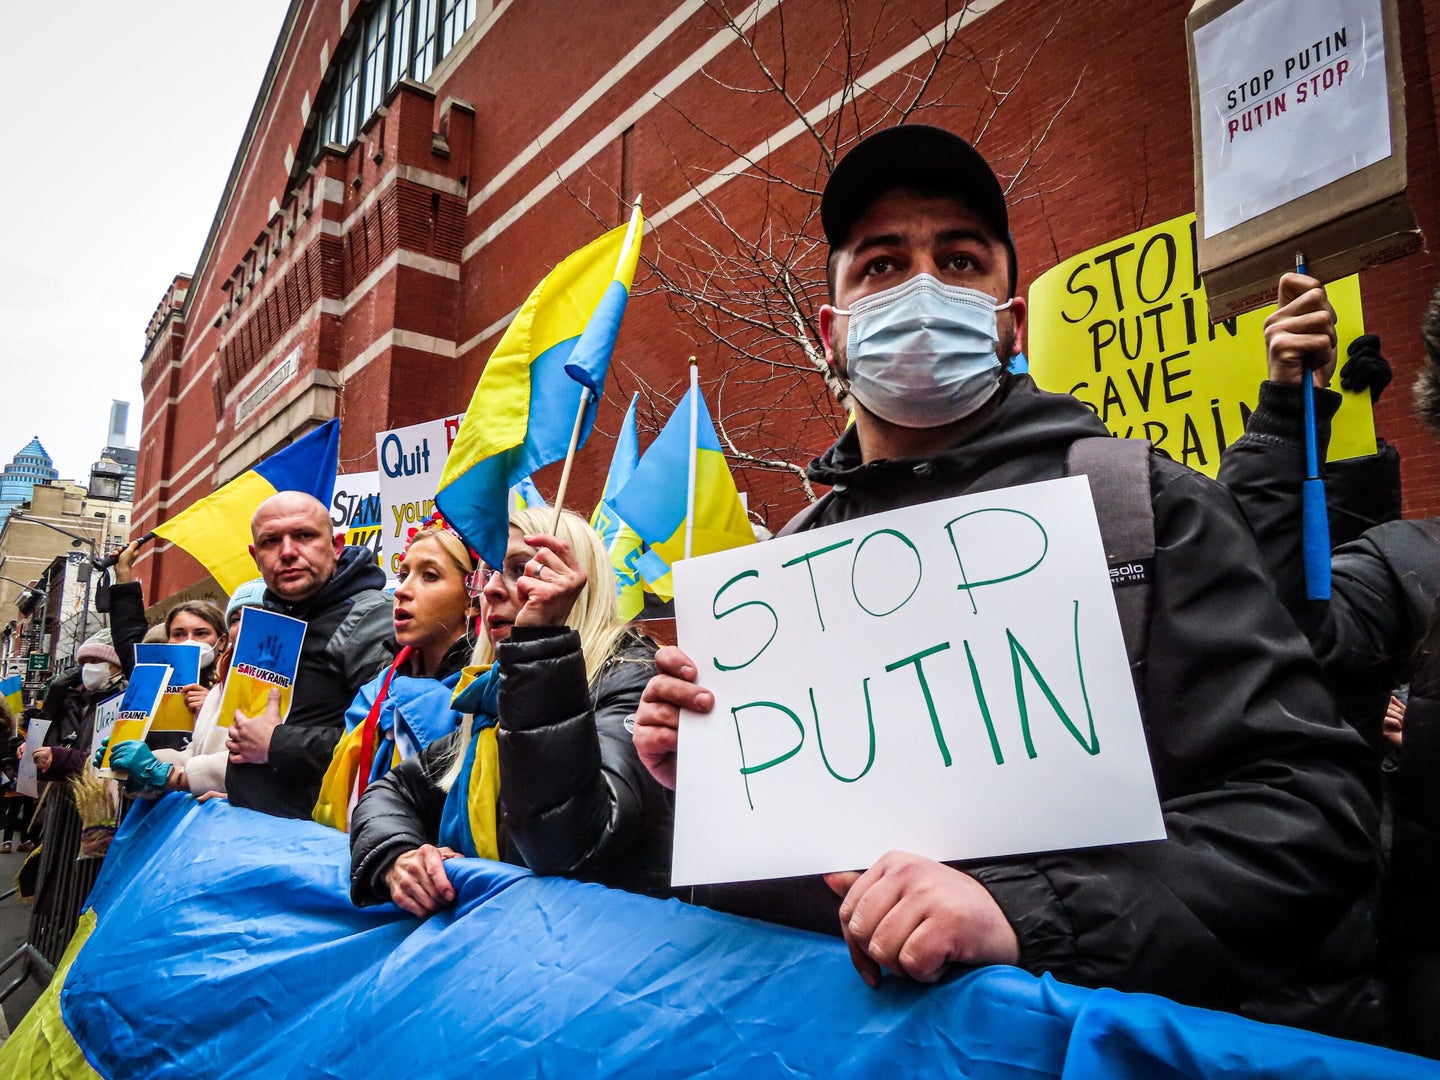 Protesters oppose Russia's attack on Ukraine, which is causing a health care crisis.